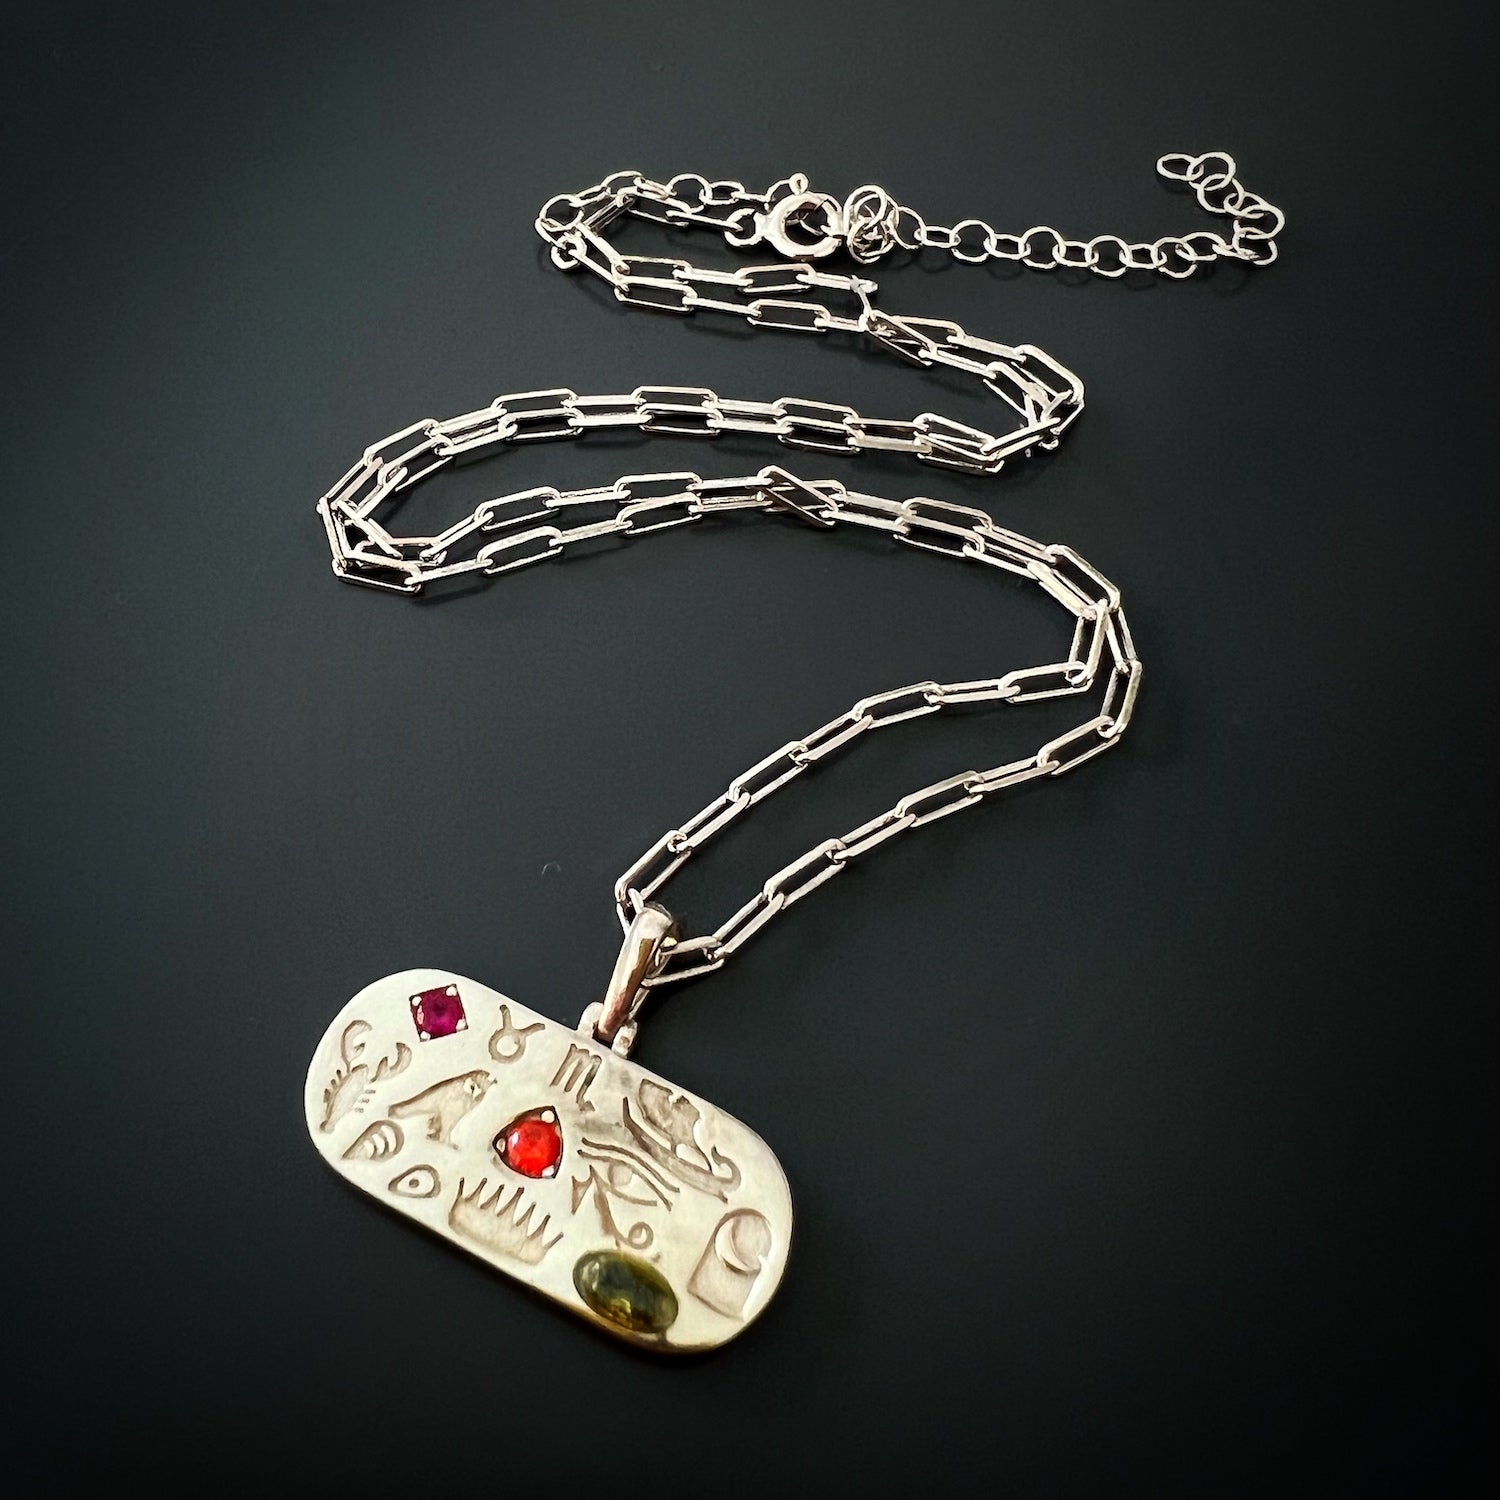 Handcrafted Egyptian Symbols Necklace with Vibrant Zircon Stones, adding a pop of color and spiritual energy.